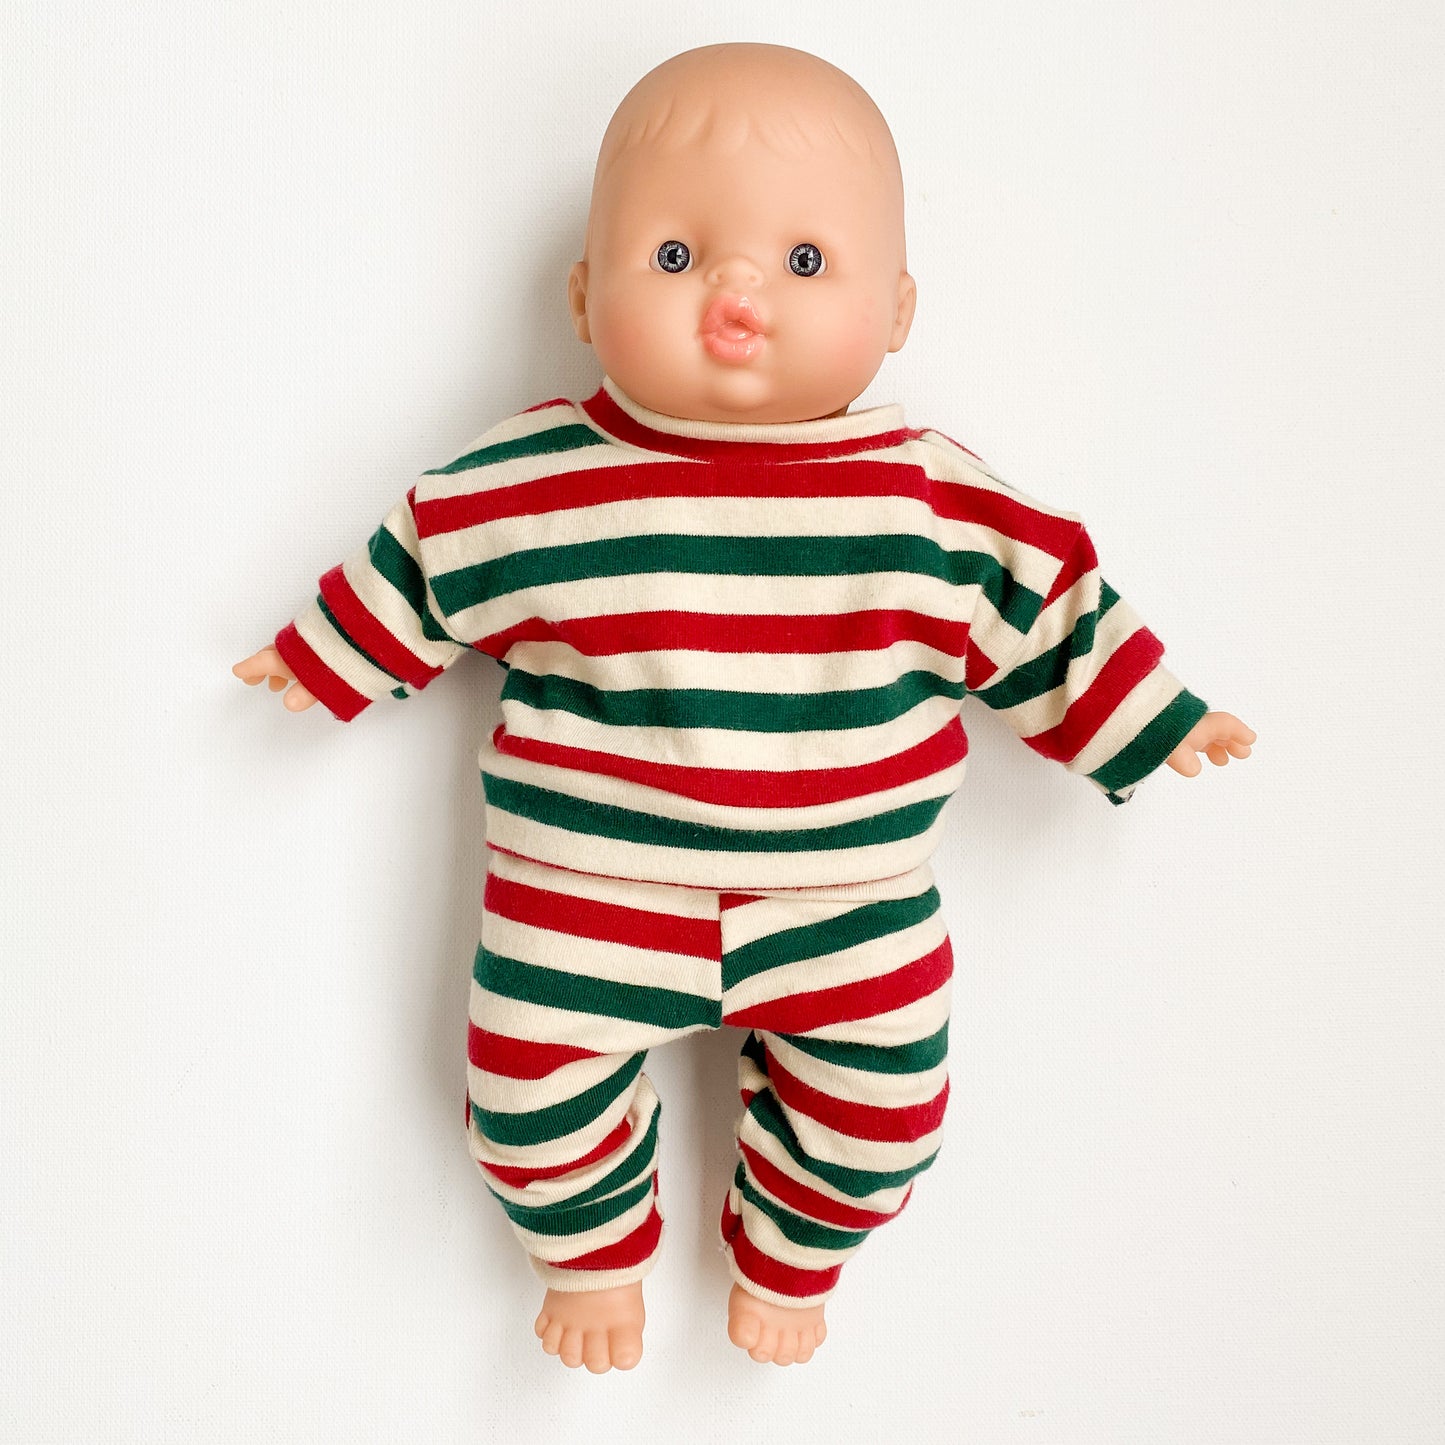 Kid's and Doll's Matching Christmas Jammies